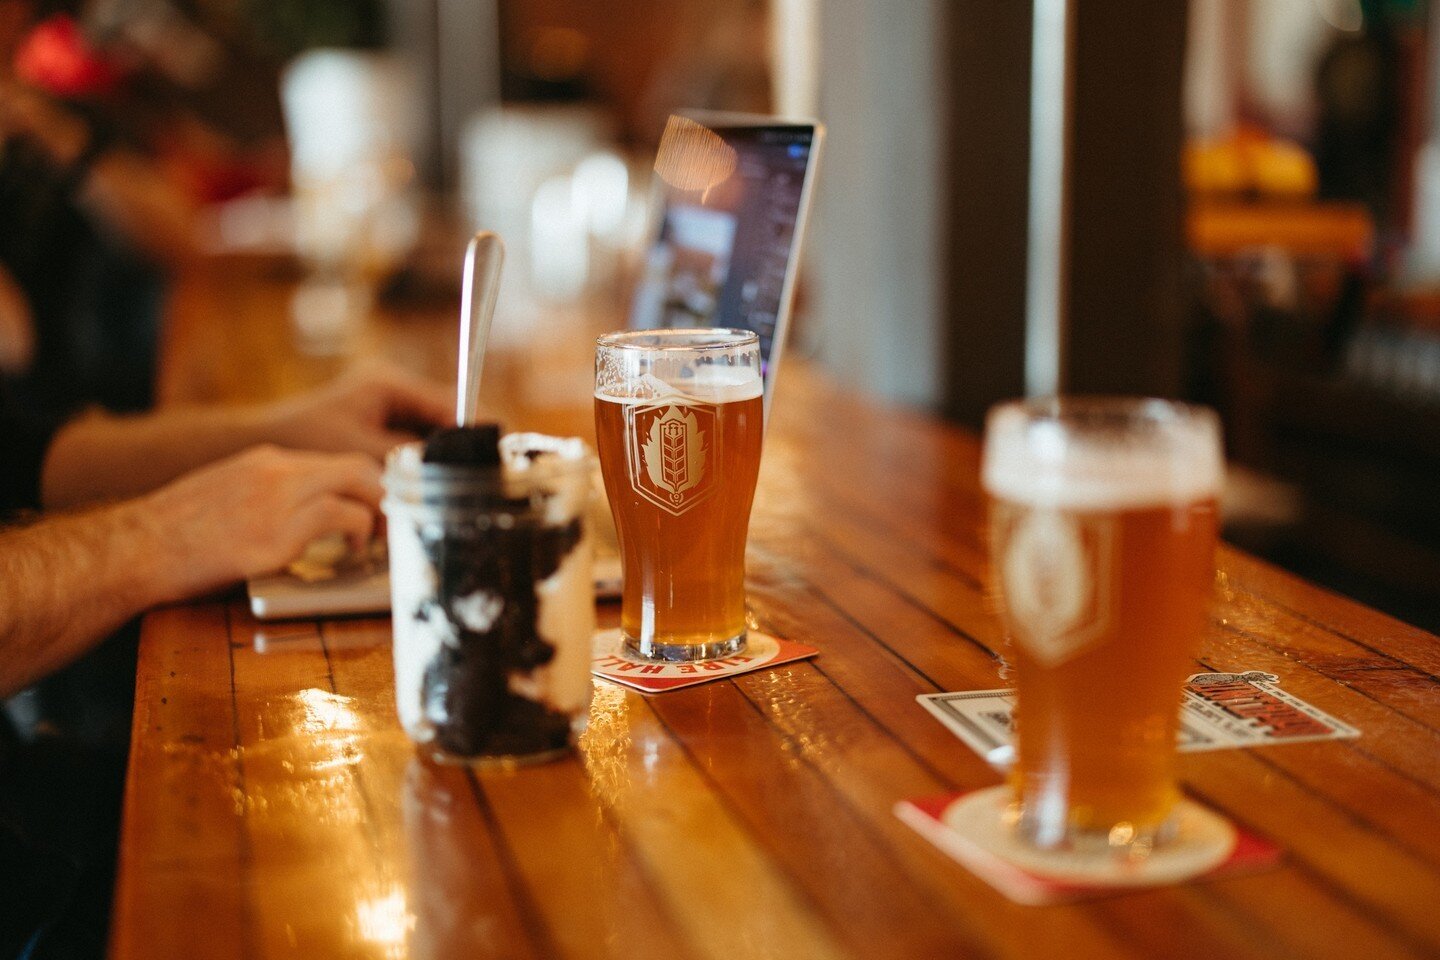 The best kind of co-working. While we don't guarantee optimum productivity, we do guarantee an afternoon well spent.⁠
⁠
⁠
⁠
⁠
⁠
⁠
⁠
⁠
⁠
⁠
⁠
⁠
#fhkt2022 #heritage #beer #foodie #yummy #tasty #eatlocal #drinklocal #gourmet #restaurant #pub #explore #lo